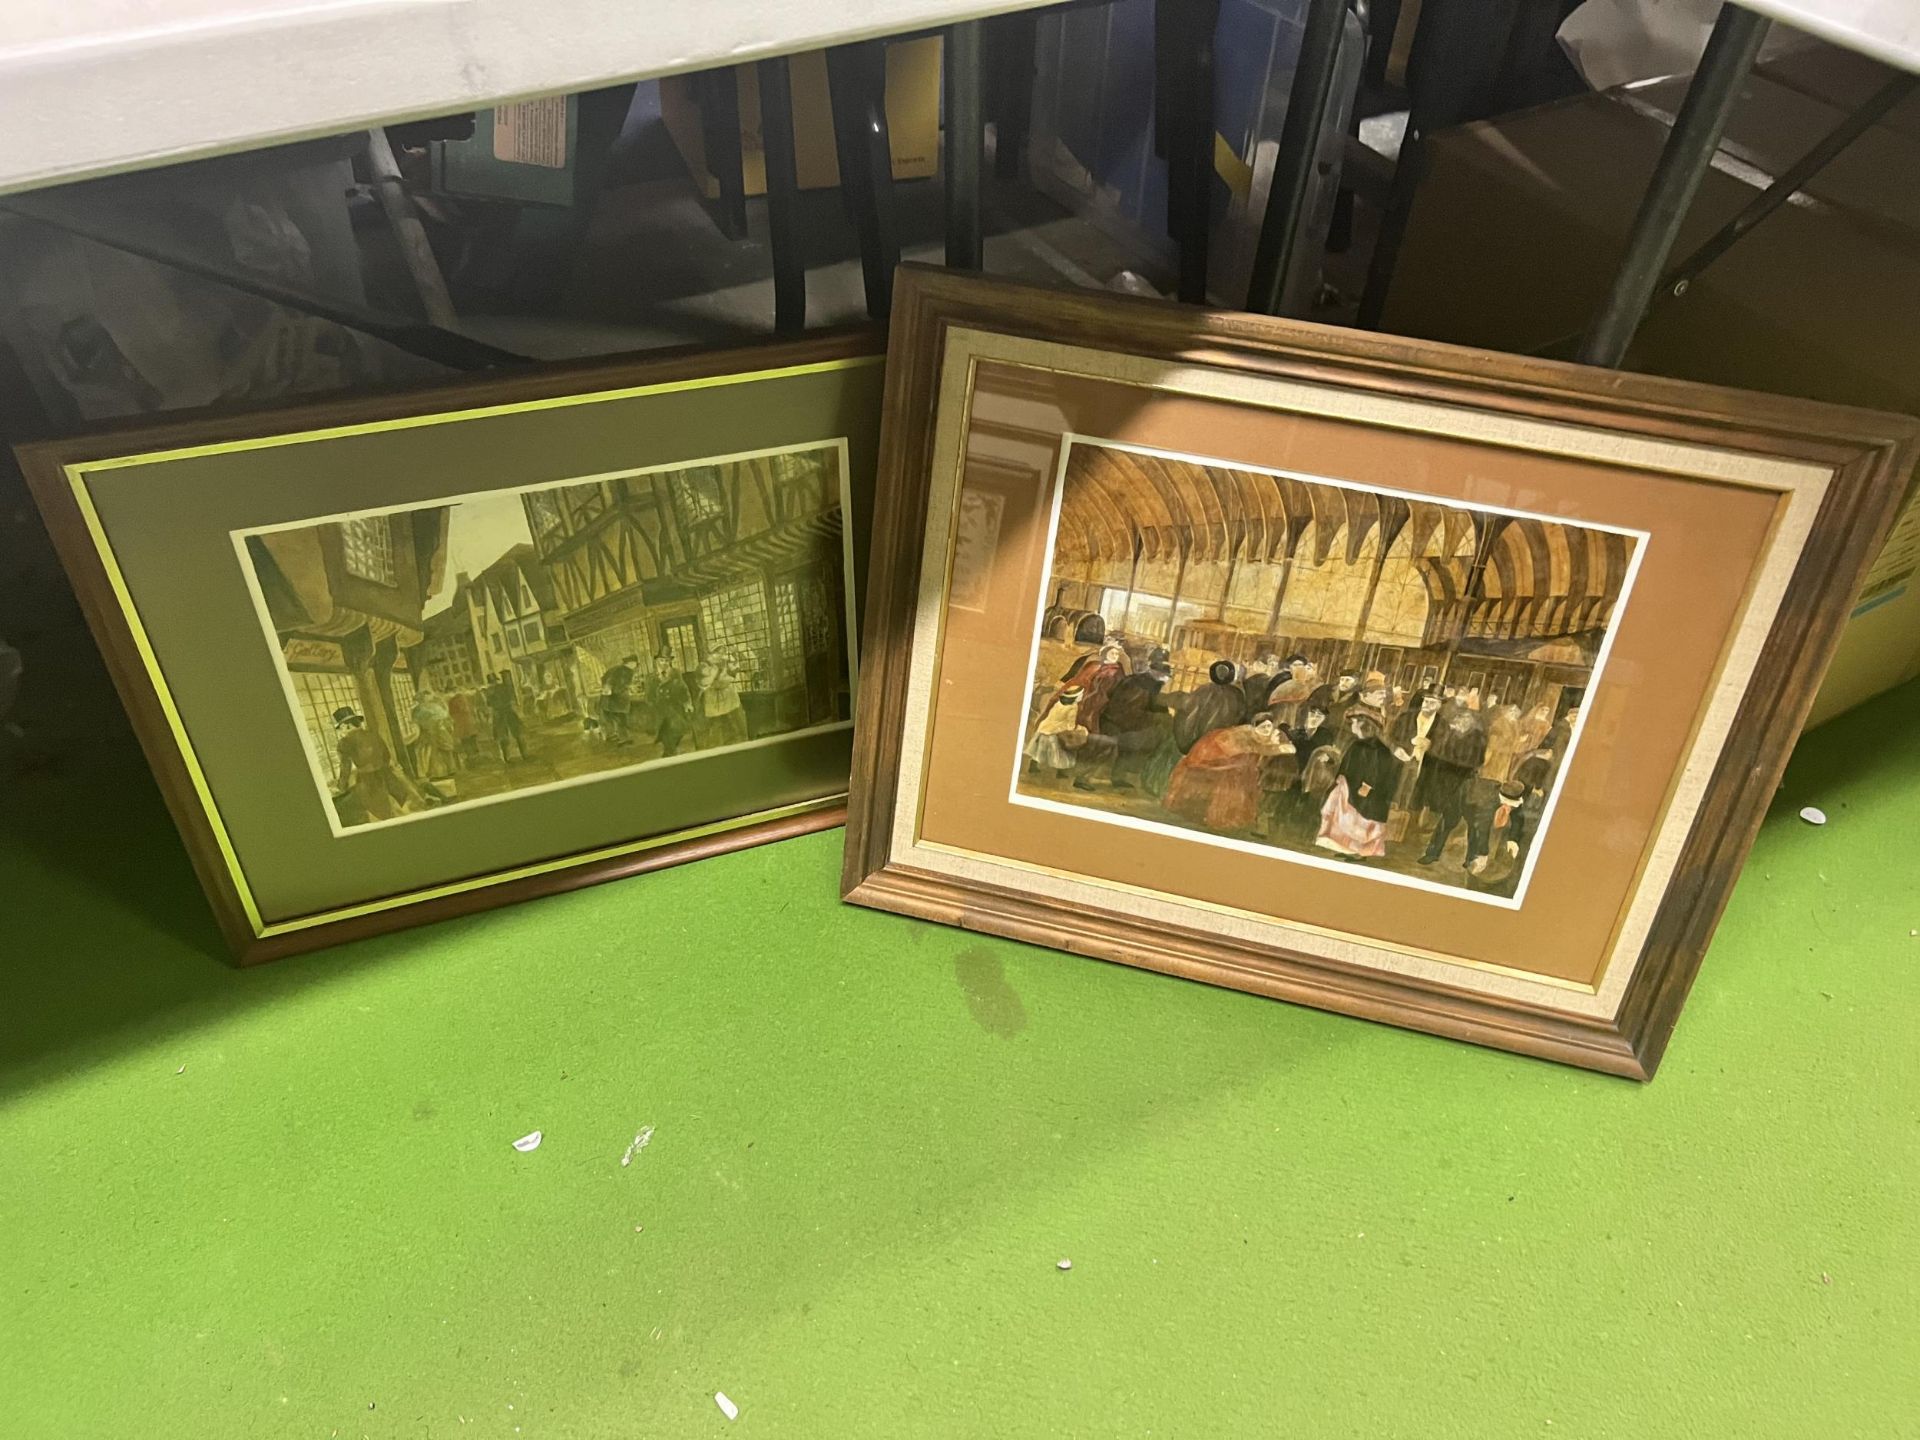 TWO FRAMED PRINTS OF A VINTAGE TOWN (CHESTER?)